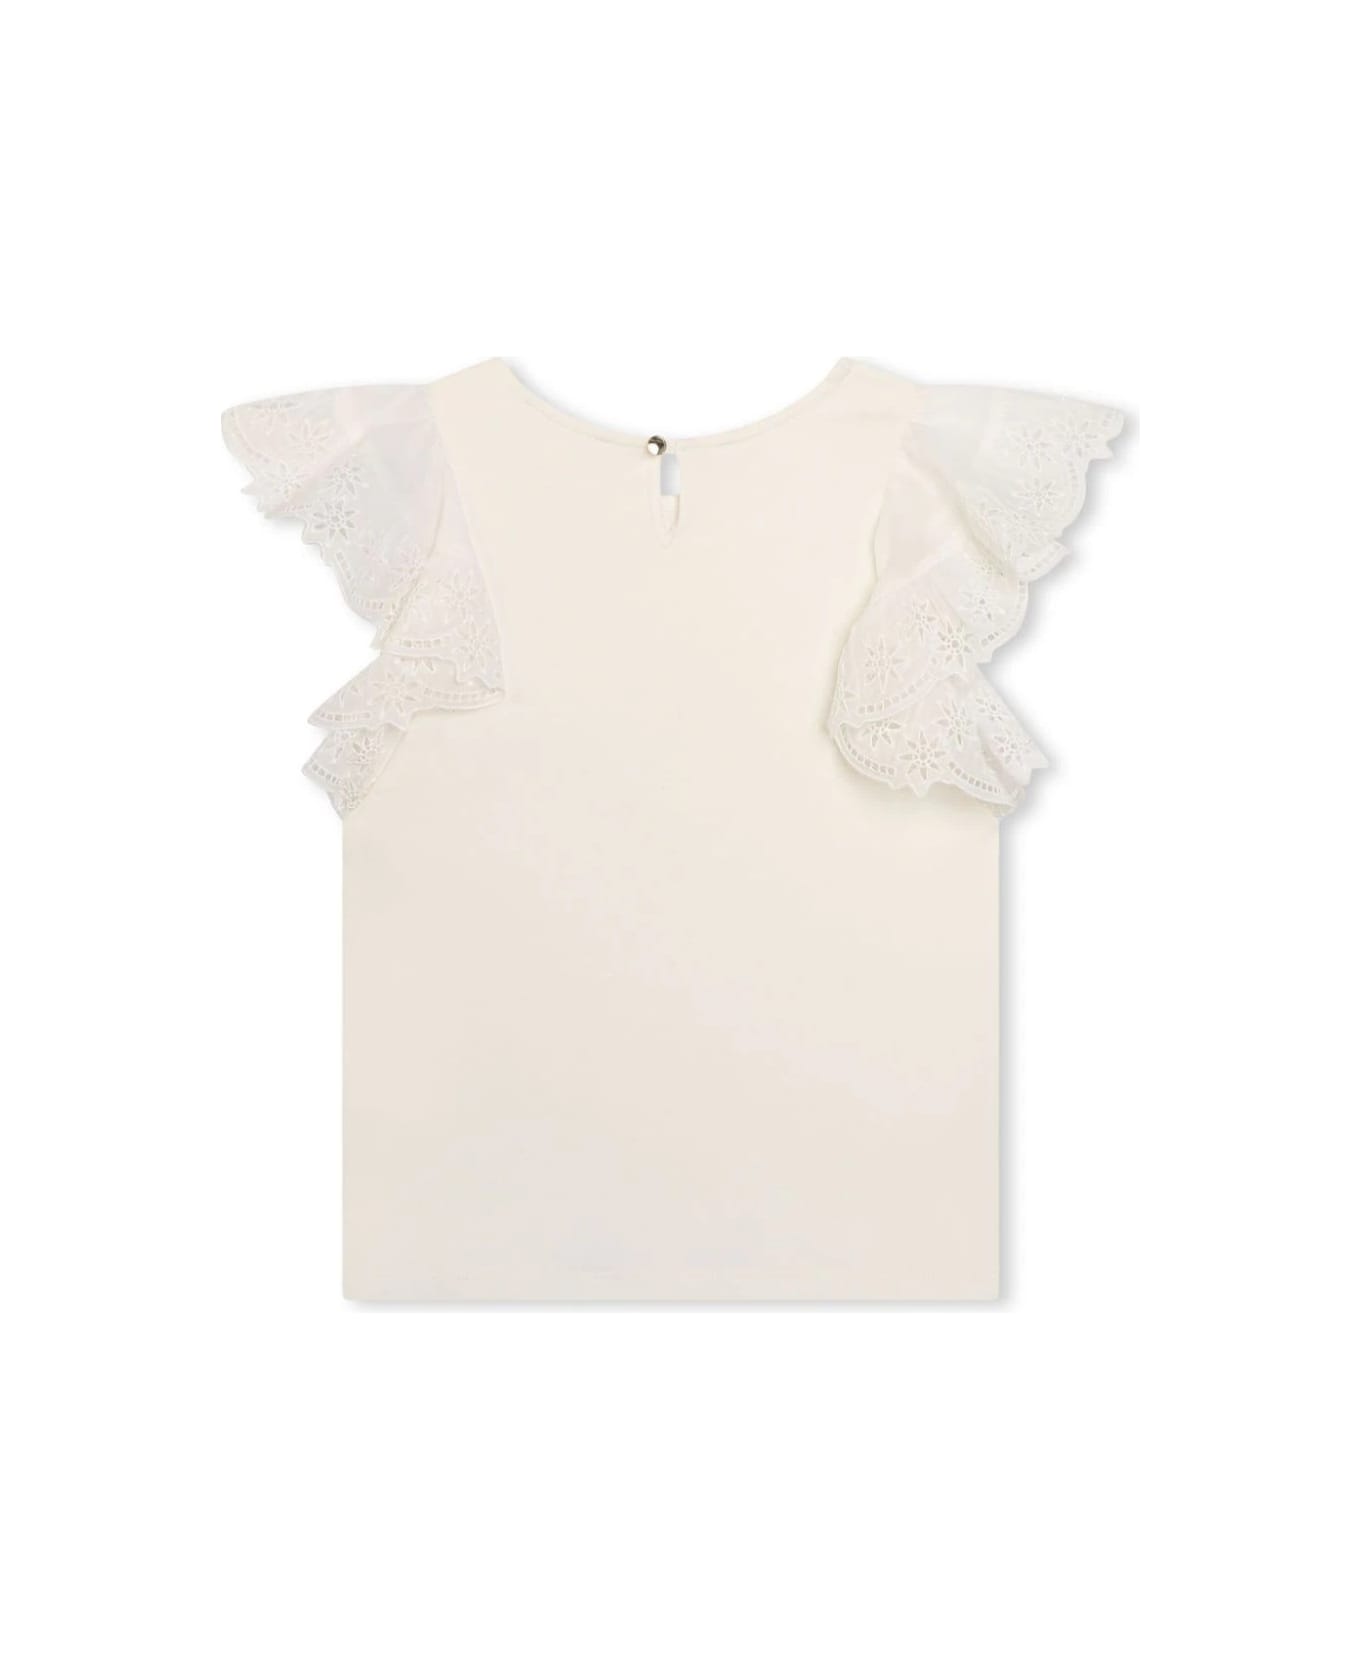 Chloé White Top With Embroidered Ruffles - White